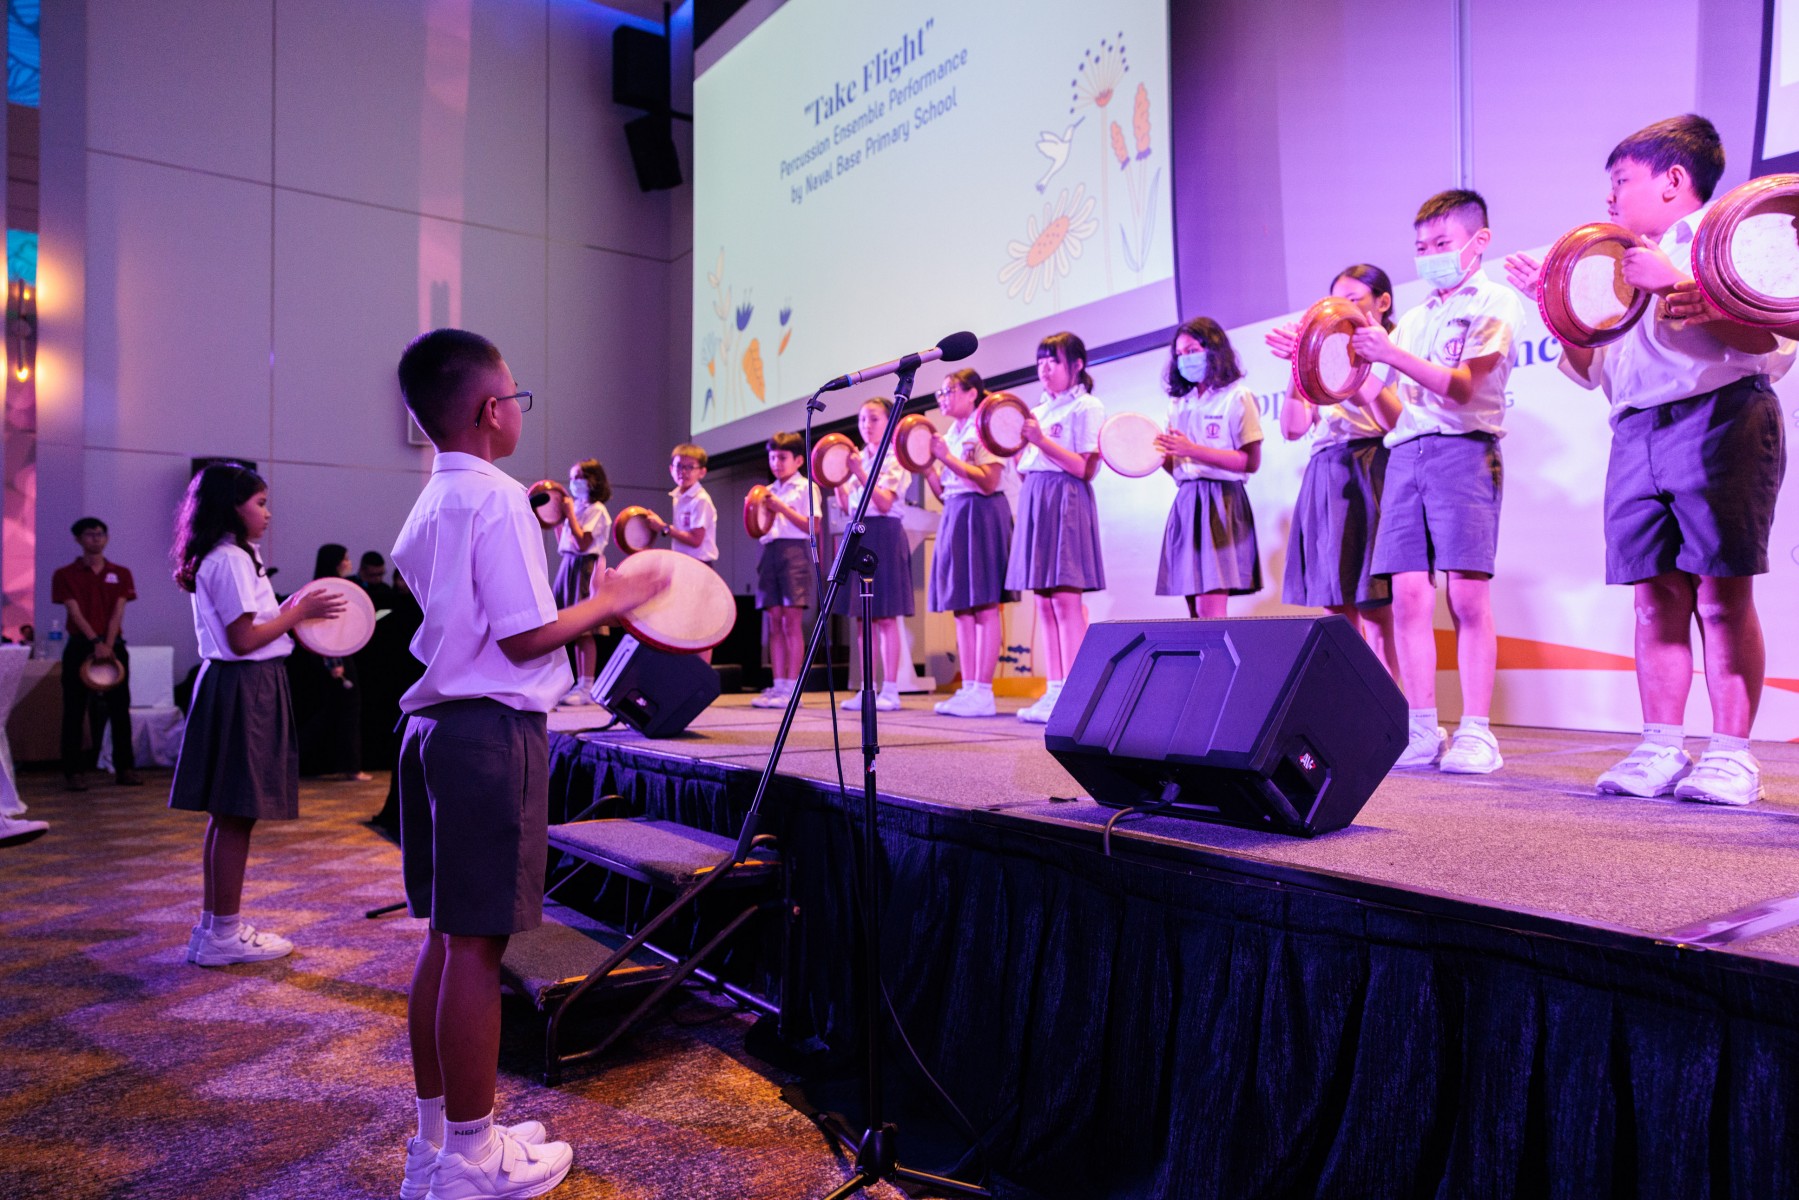 Mentees from Naval Base Primary School percussion ensemble thanked the mentors with a lively performance, ‘Take Flight’.
